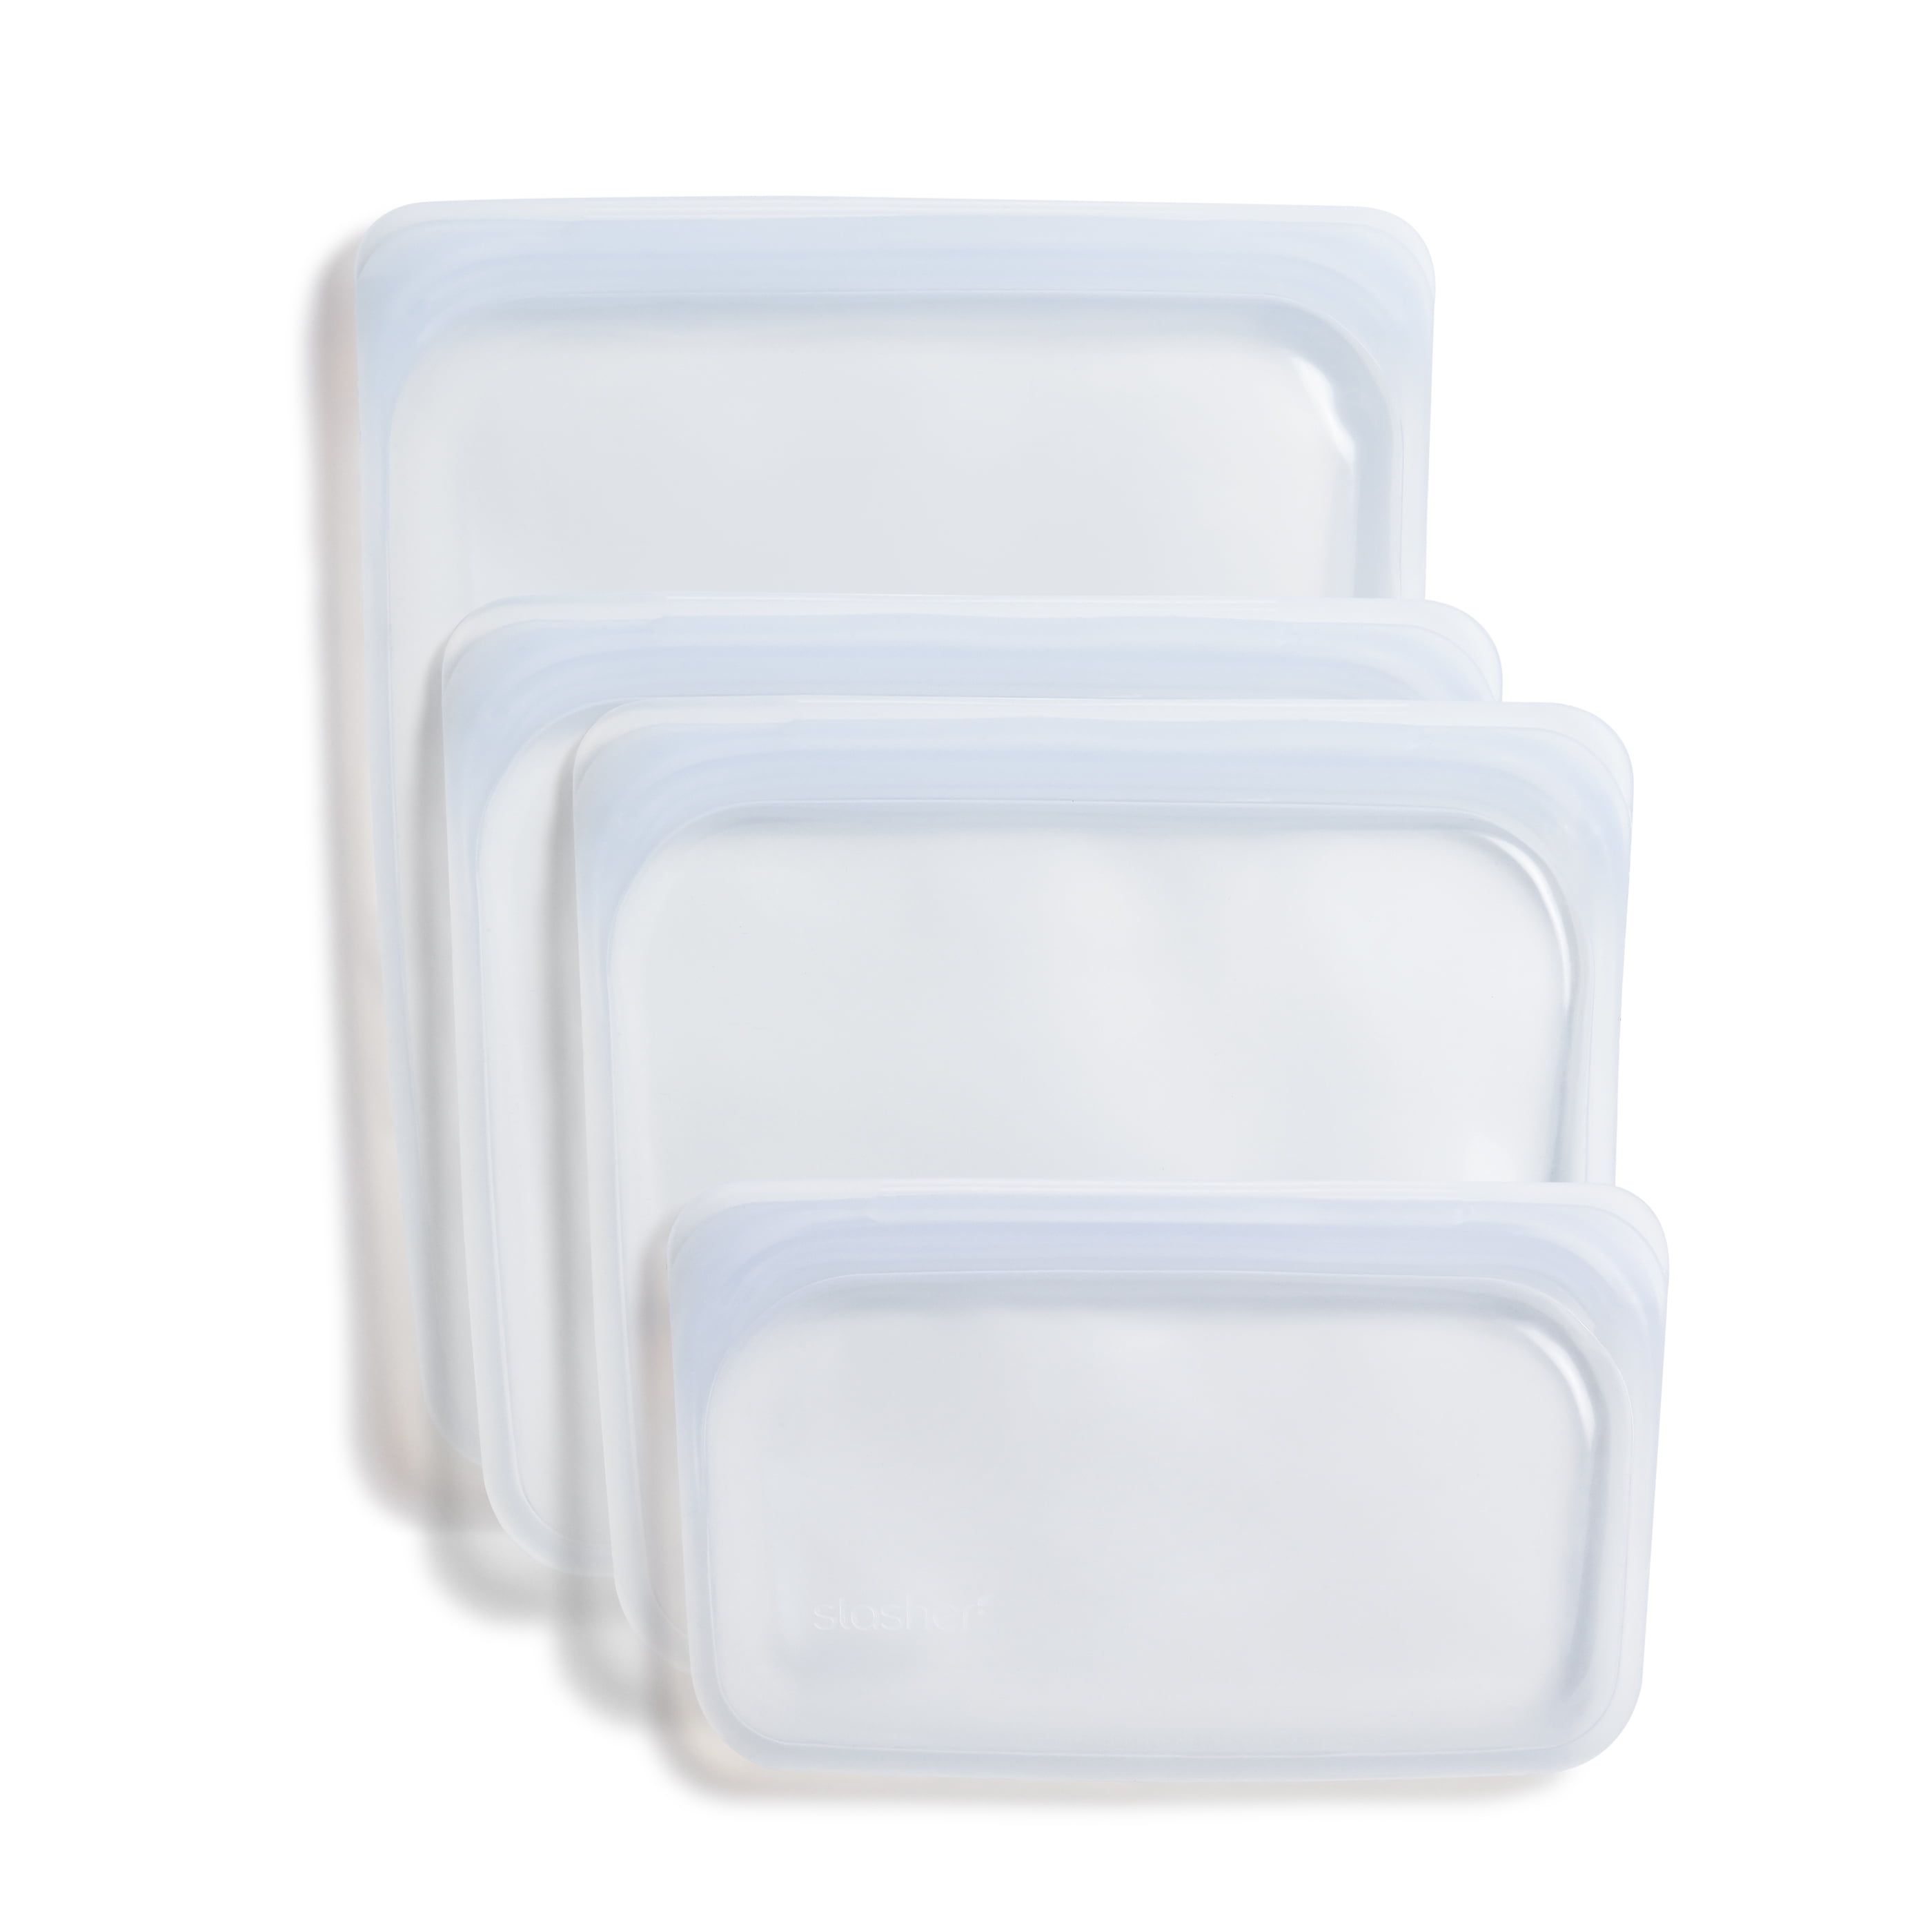 Stasher Reusable Silicone Bag Starter Kit, Clear, 4 Pack